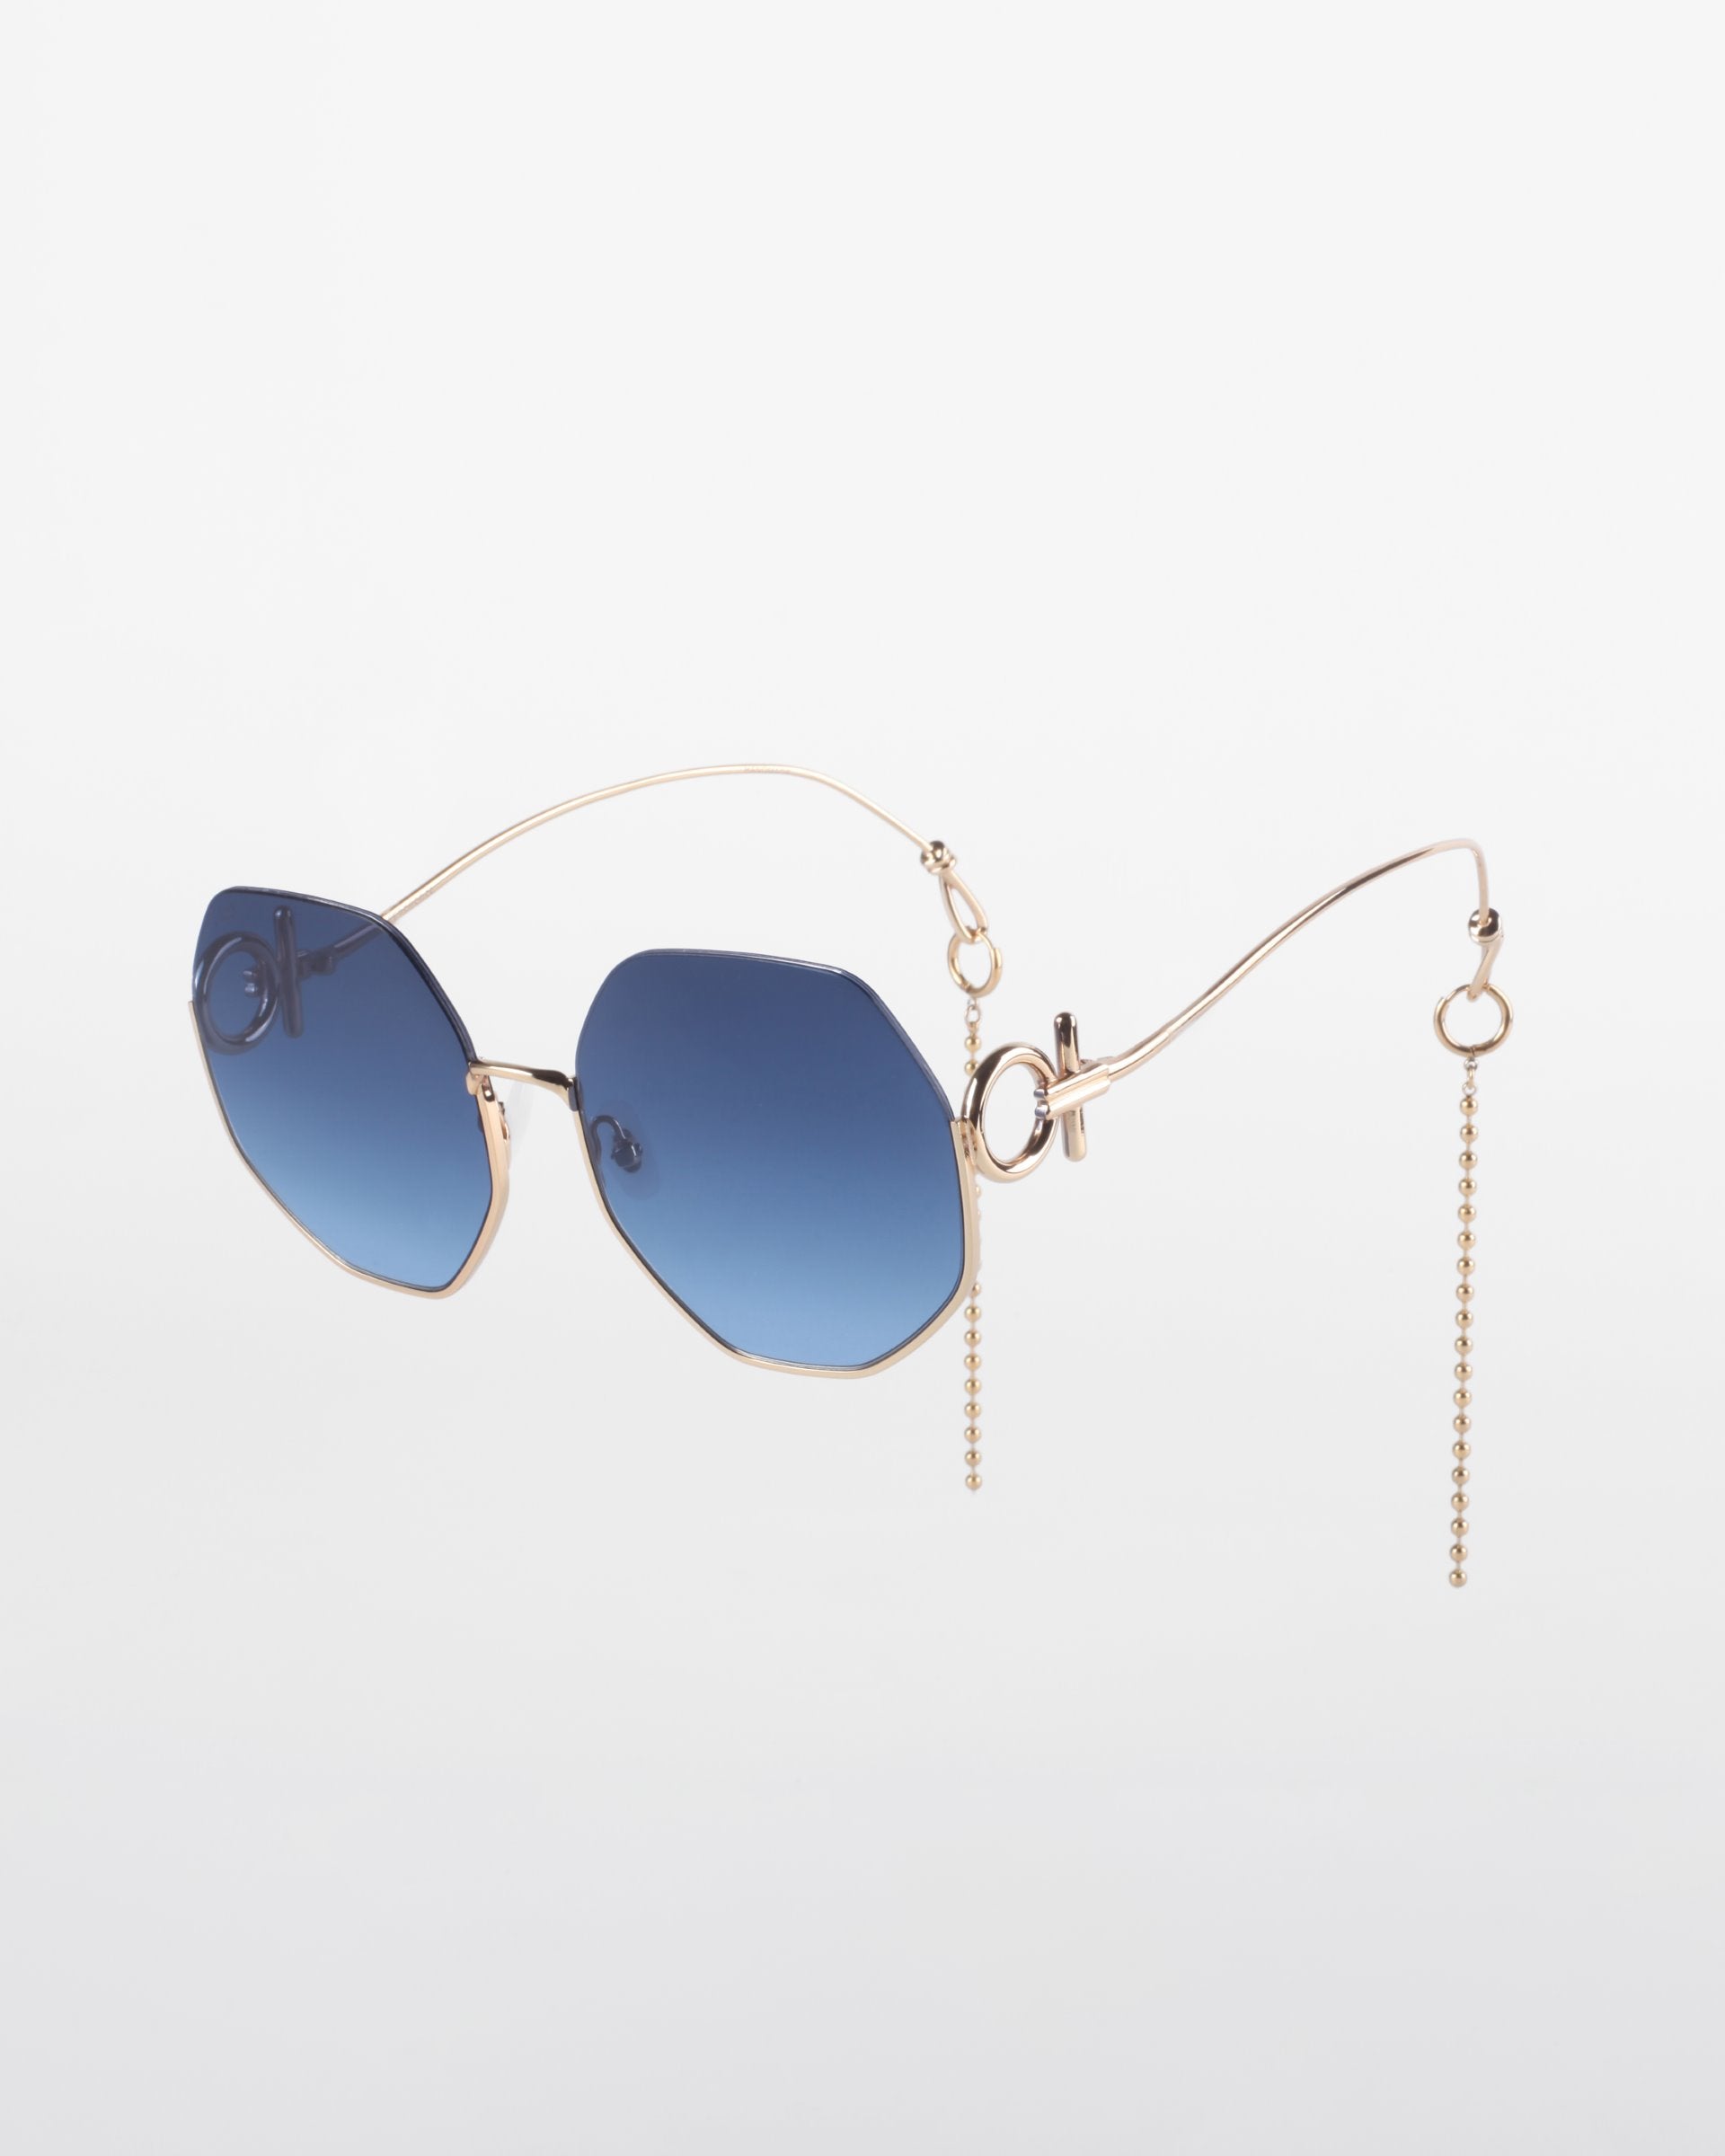 A limited edition pair of stylish sunglasses featuring blue-tinted hexagonal lenses, 18-karat gold-plated thin metal frames, and unique side arms with decorative chain accents. The background is plain white. The product name is &quot;Palace&quot; by For Art&#39;s Sake®.